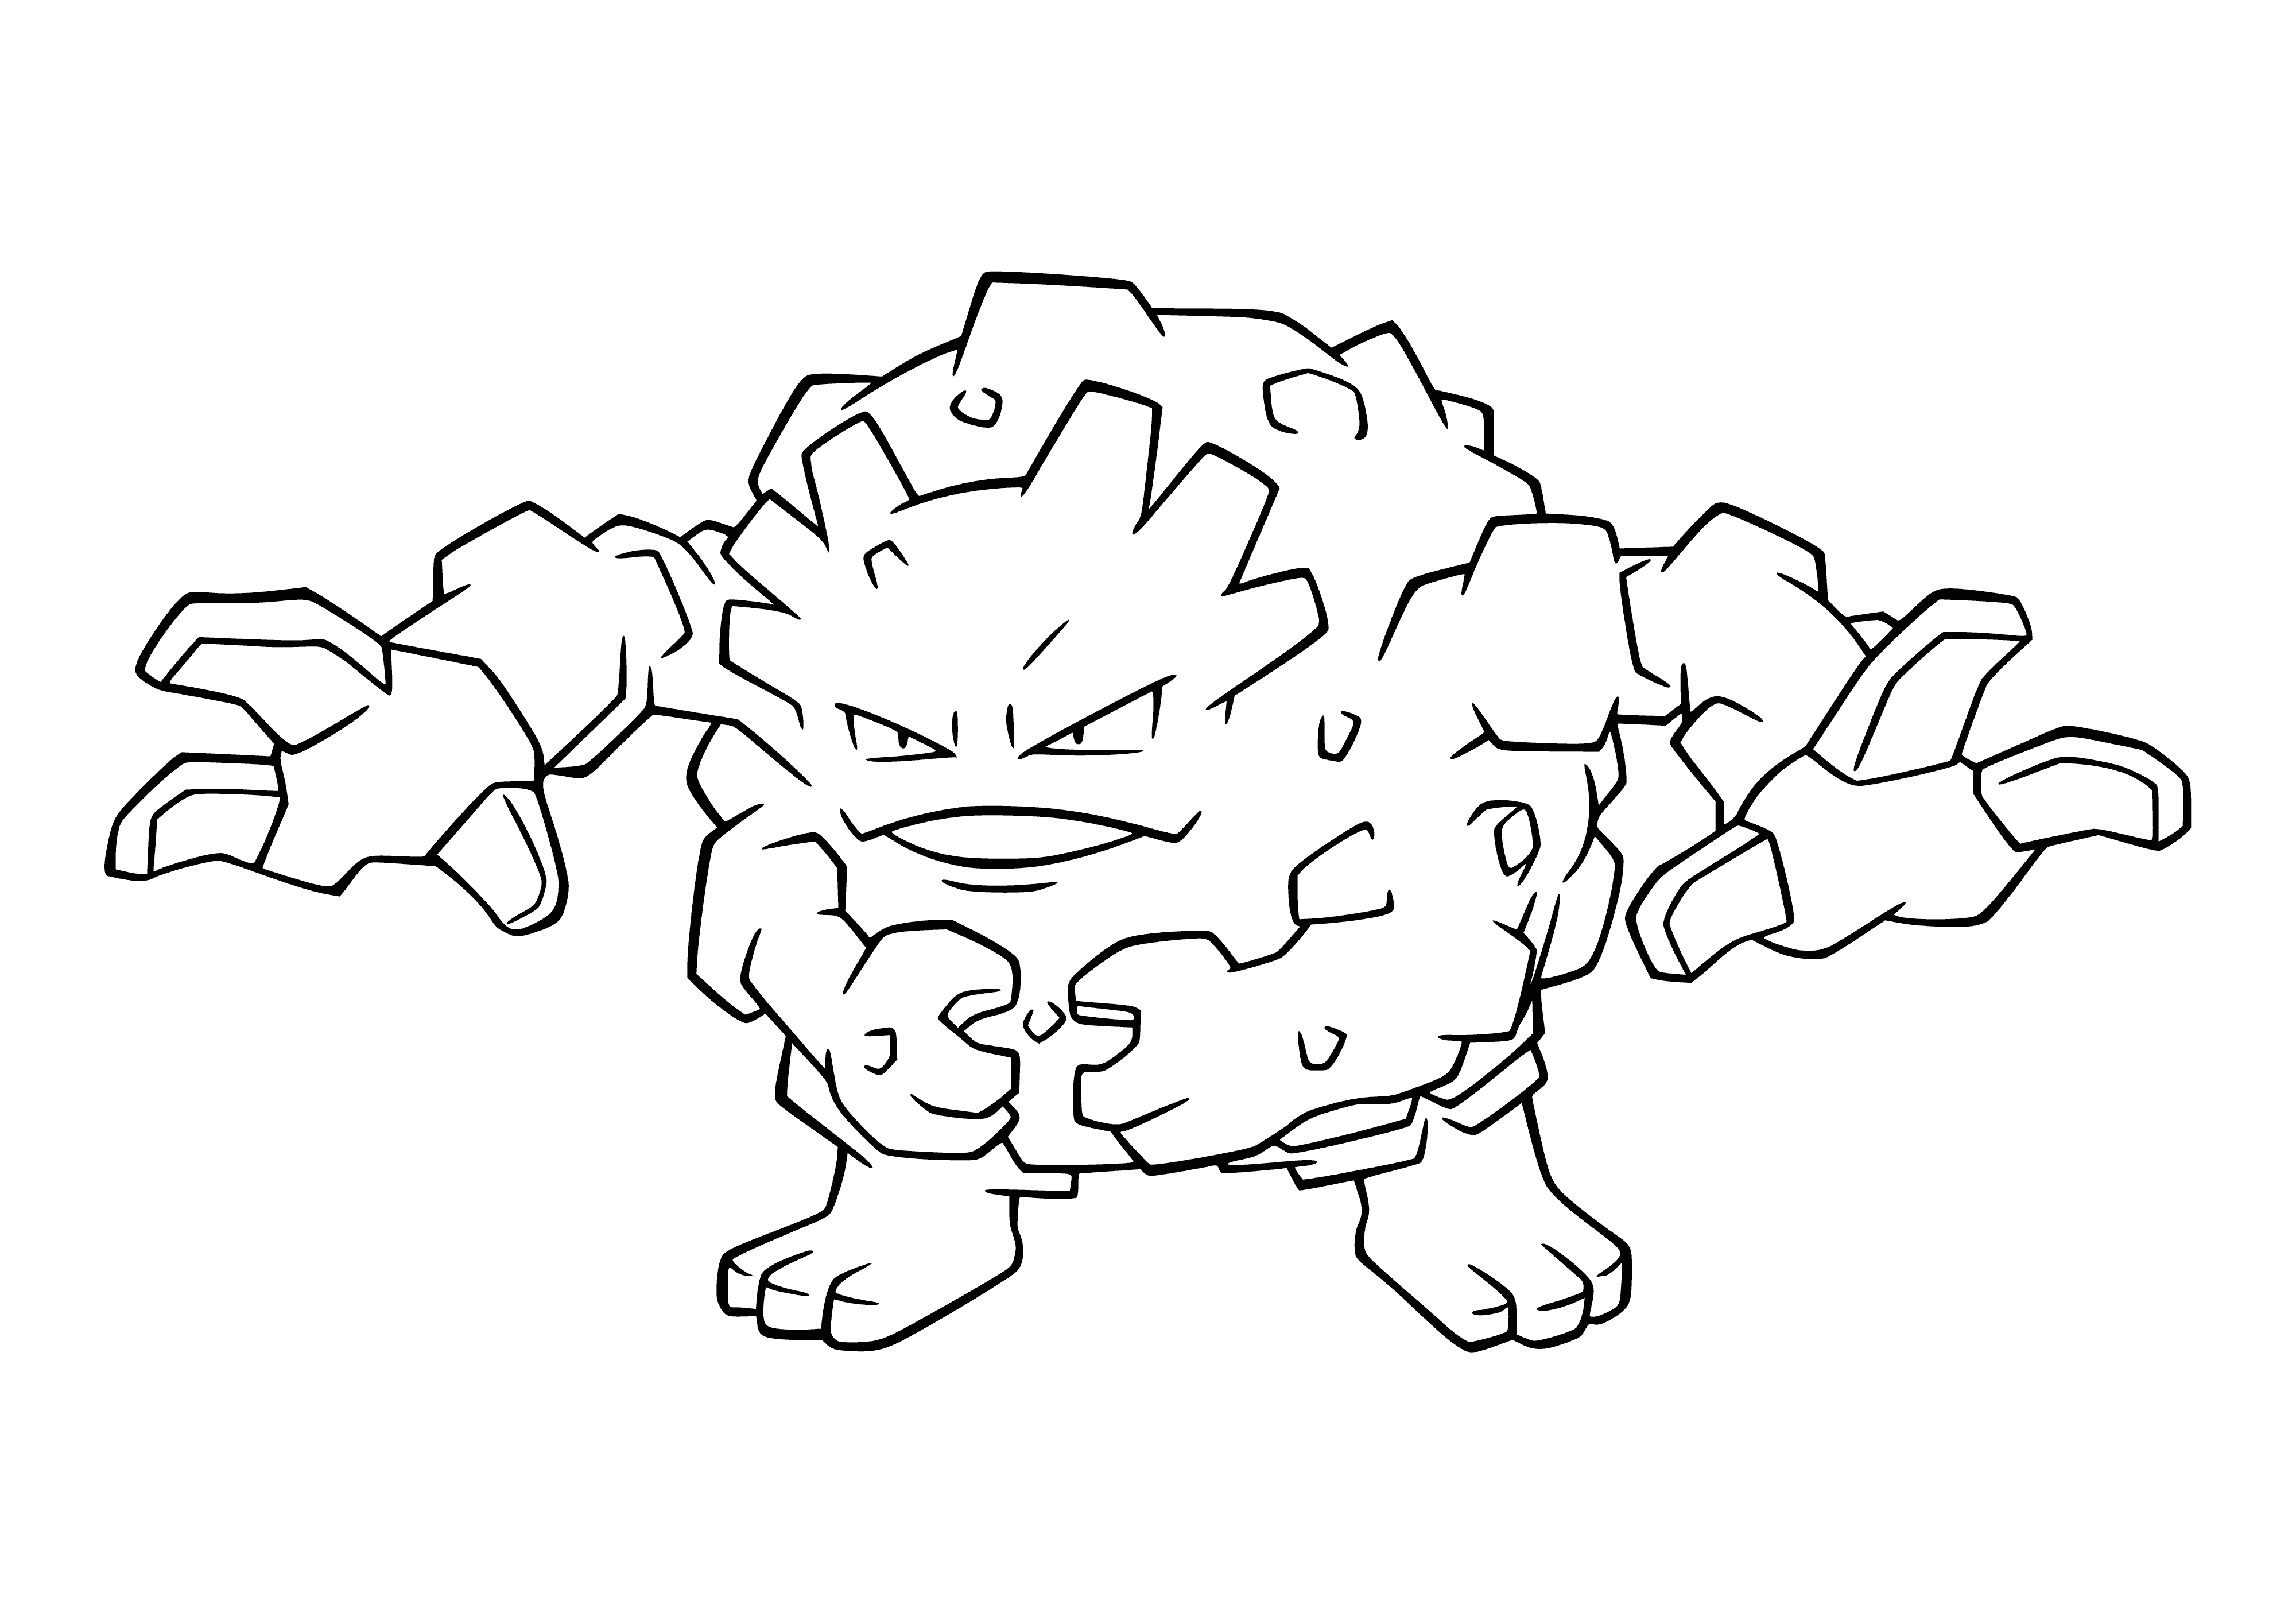 coloring page: Rock-type Pokémon Graveler evolves from Geodude, is mostly round with four stubby legs and has two large red horns and a black diamond pattern on its back.